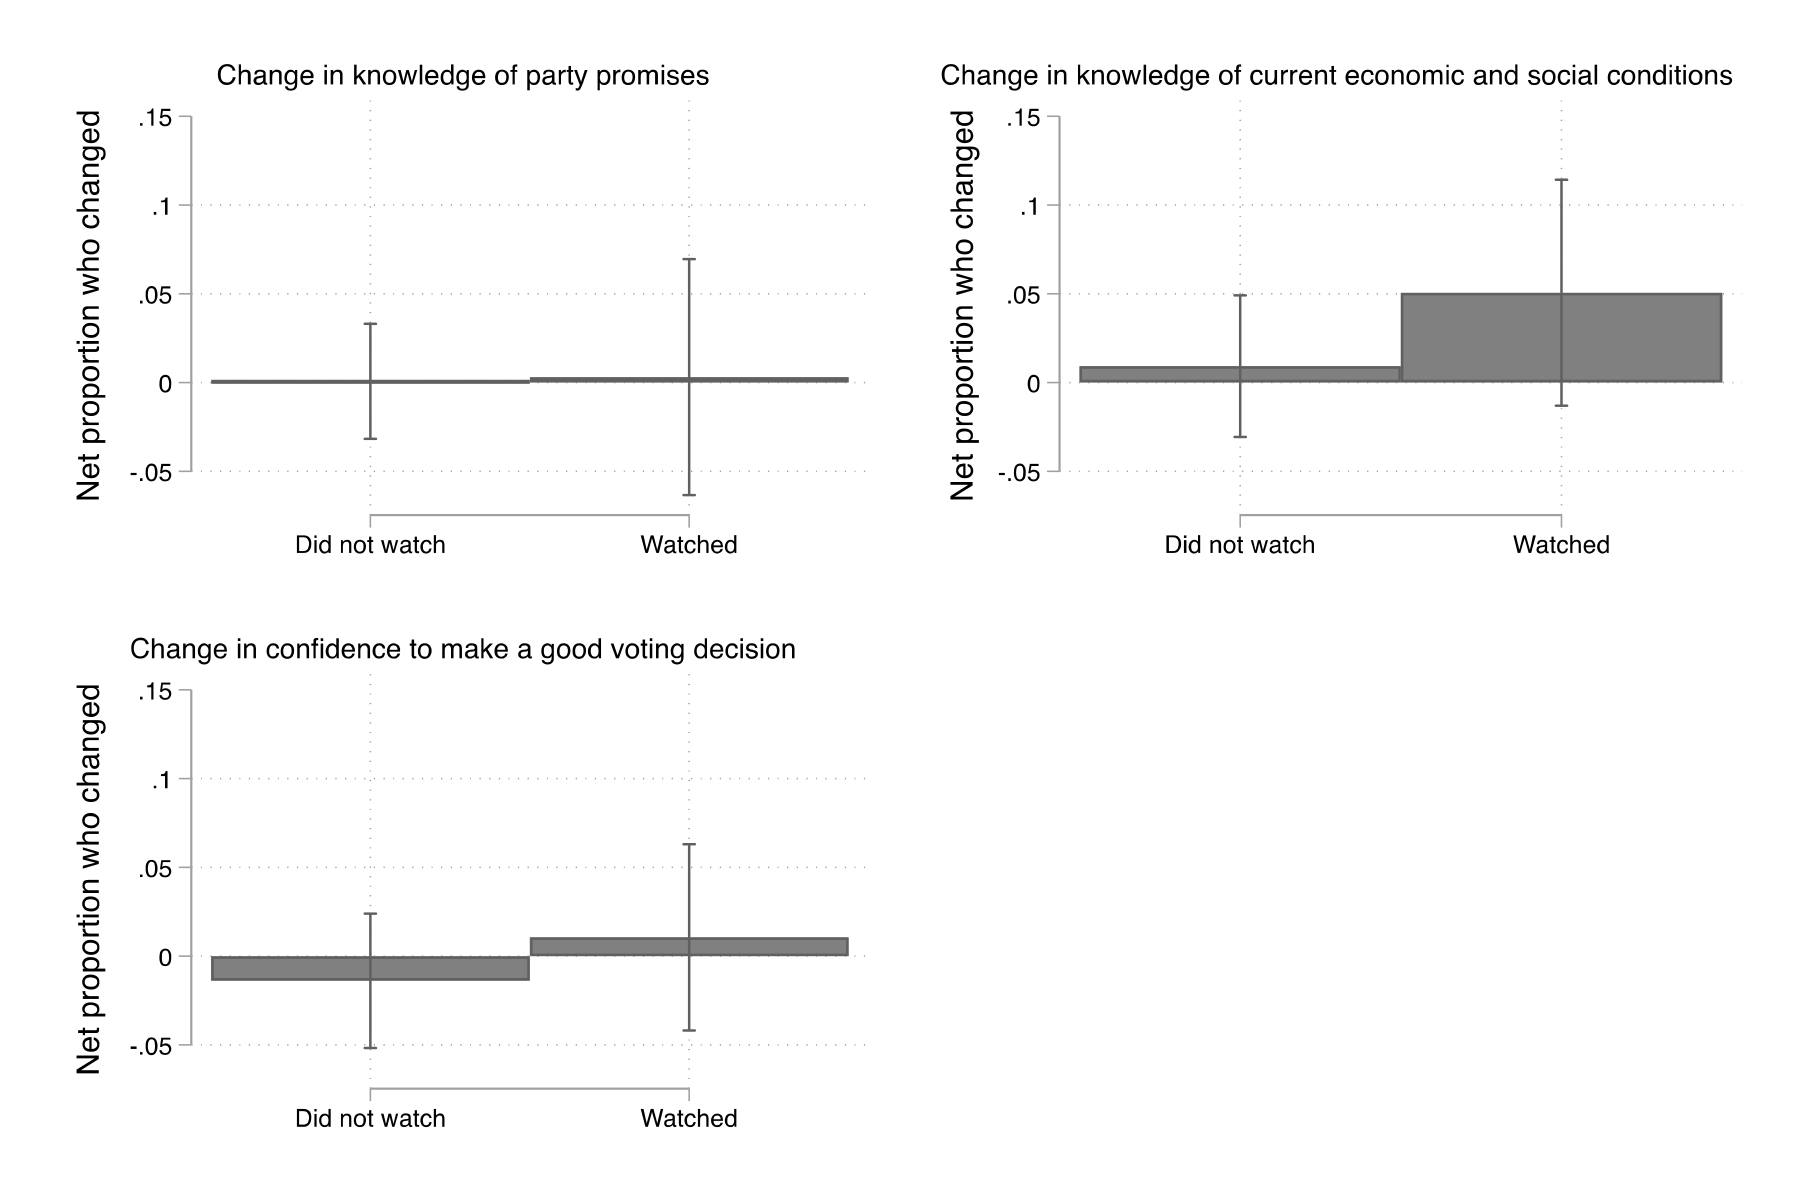 Figure 24. This figure shows the impact of debate viewership on three political knowledge outcomes: knowledge of party promises, knowledge of current economic and social conditions, and self-confidence in making a good voting decision. Debate watching was not associated with changes in any of these three outcomes.